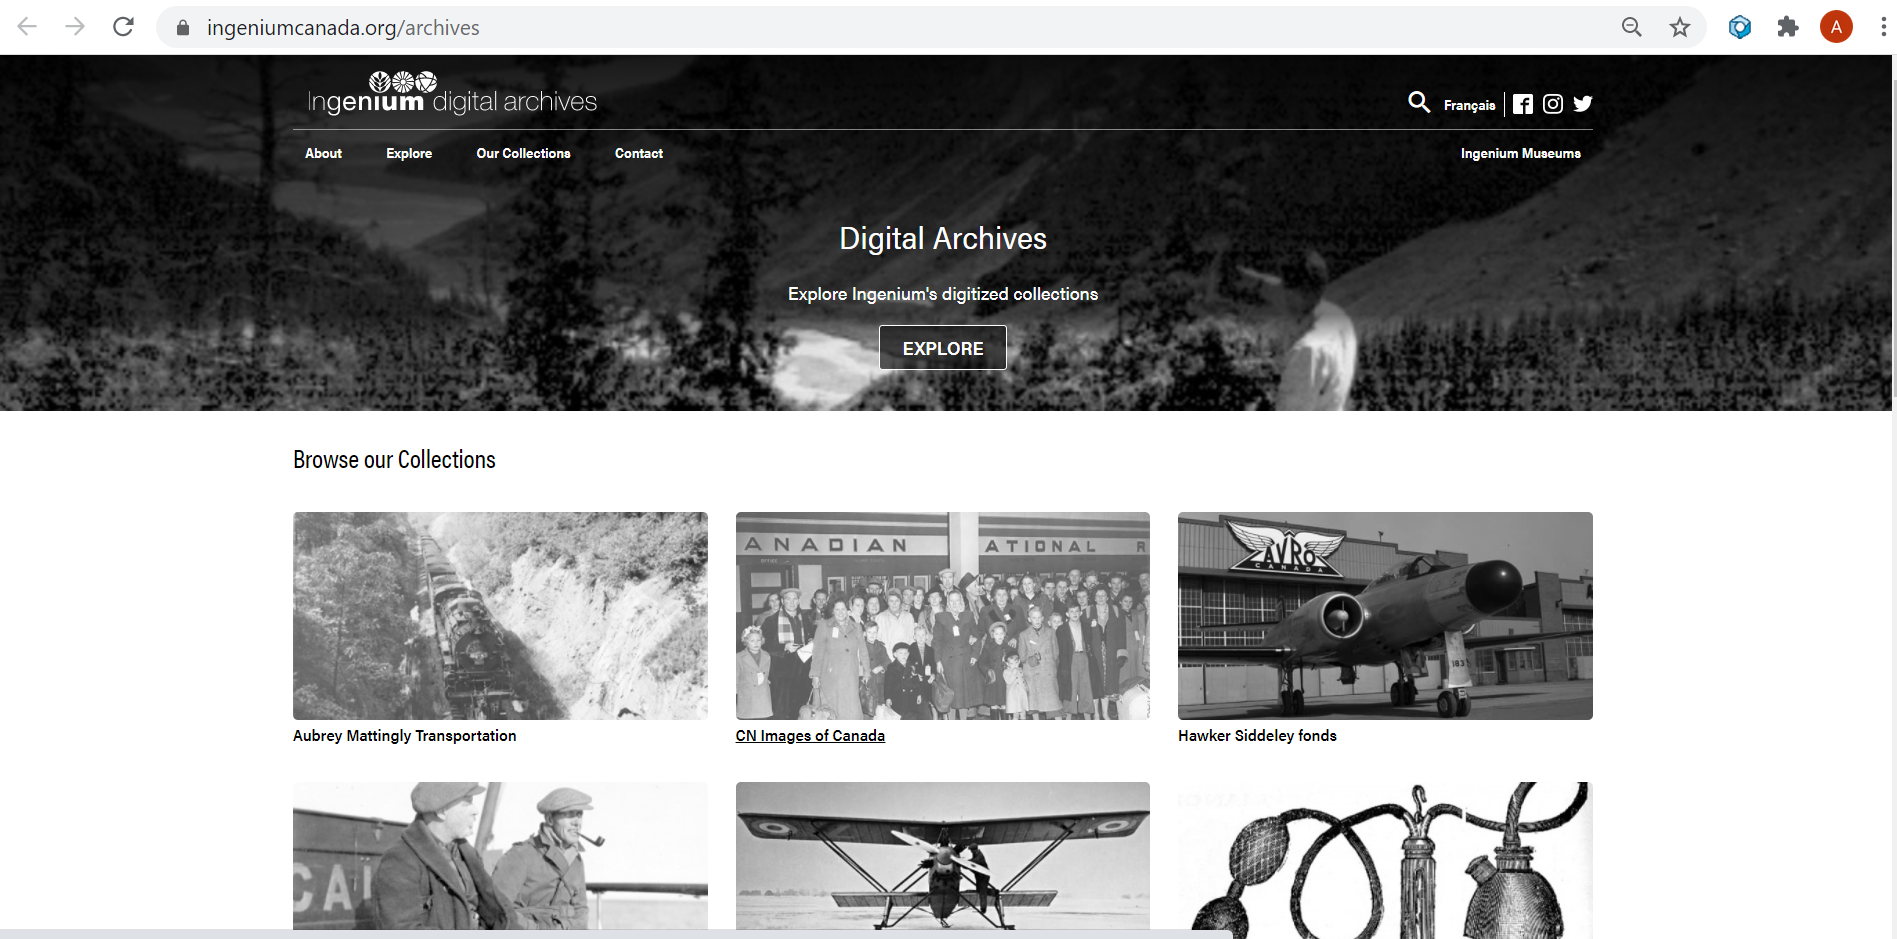 Image is a screen shot of Ingenium’s Digital Archives portal. Underneath the banner with links to other corporate websites there is the portal title, Digital Archives, a button marked ‘Explore’, and a series of black and white photographs representing different collections.